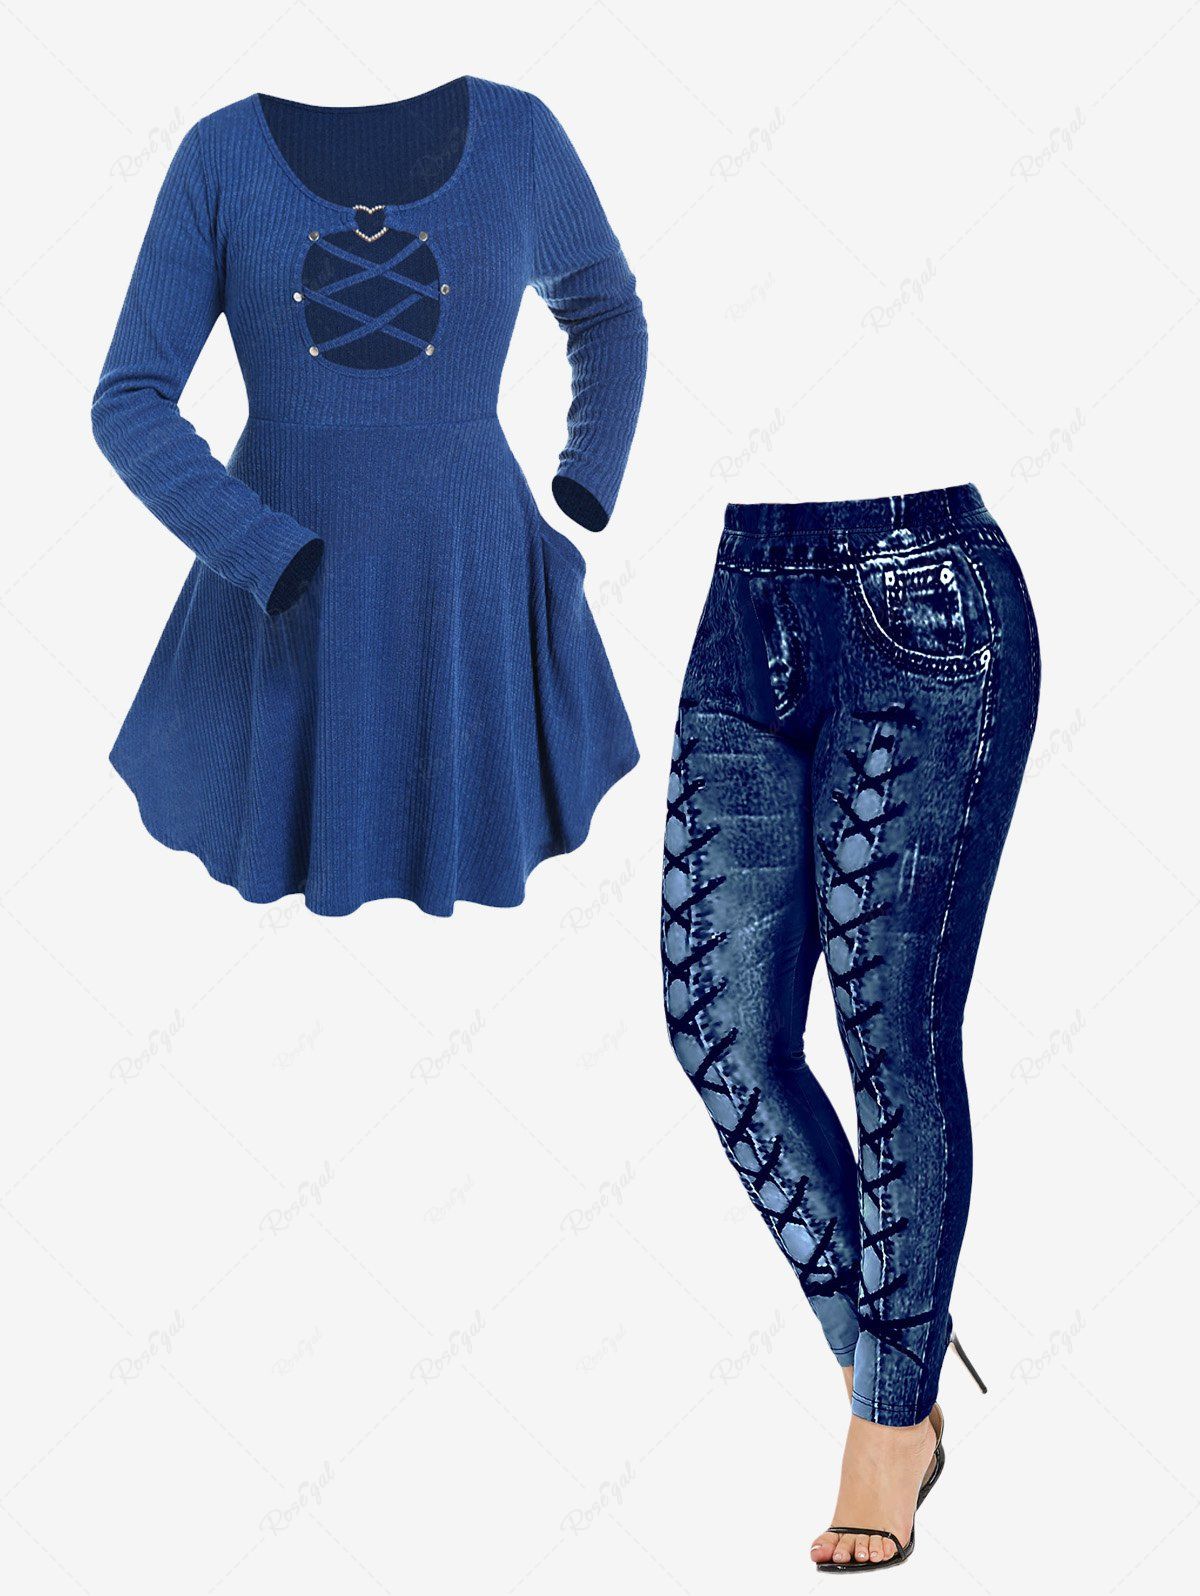 Shops Crisscross Detail Cutout Knit Rhinestone Heart Decor Top and High Waisted 3D Printed Leggings Plus Size Outfit  